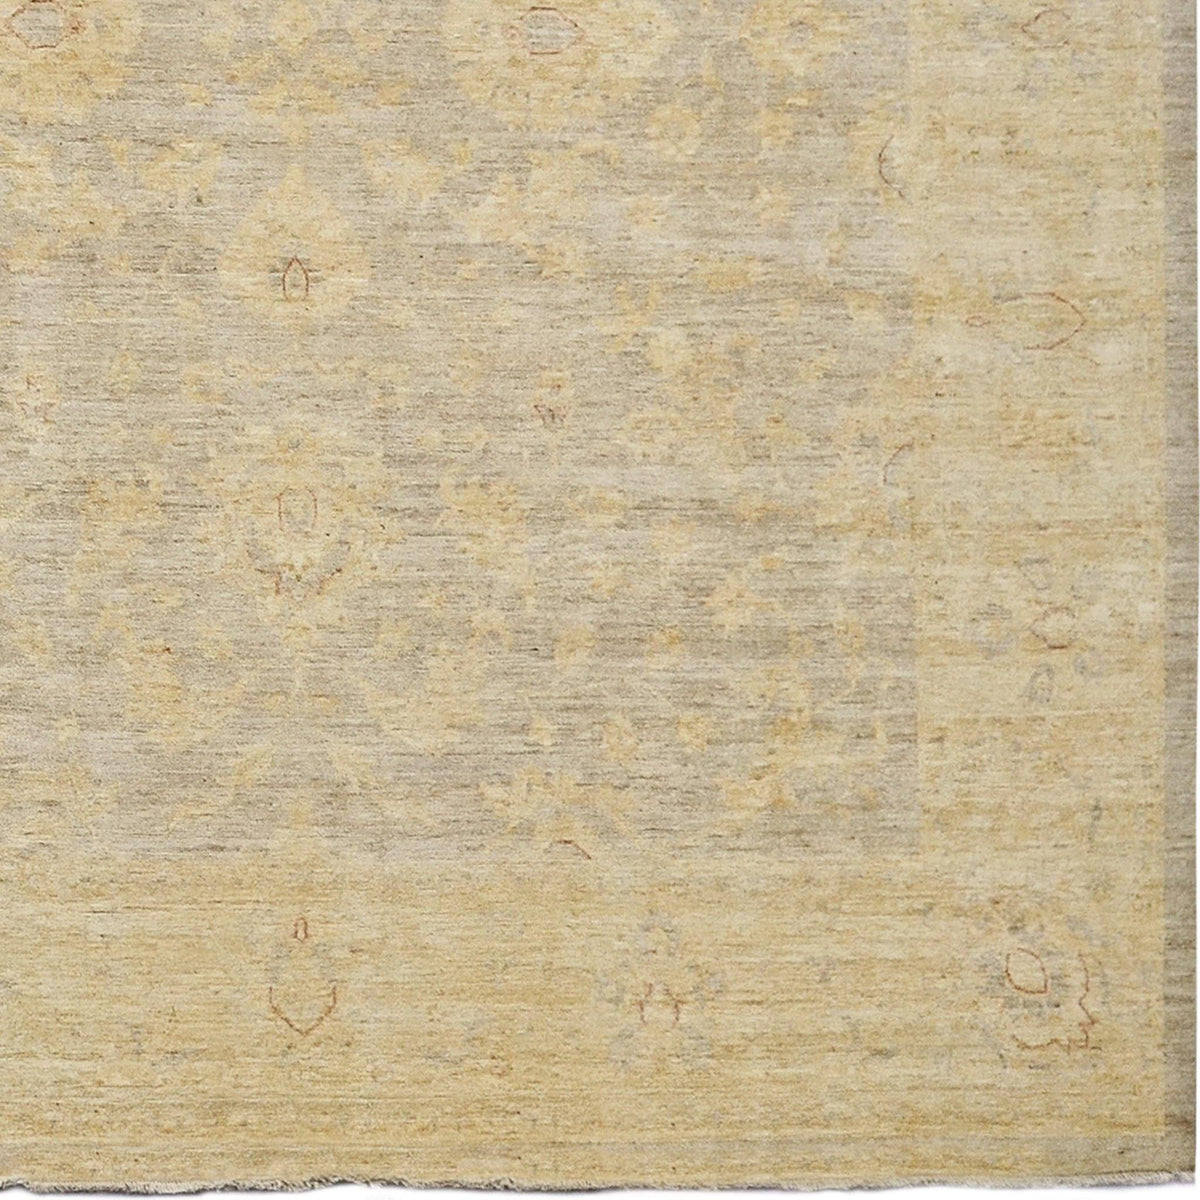 Fine Hand-knotted Colour Reform Wool Rug 247cm x 305cm